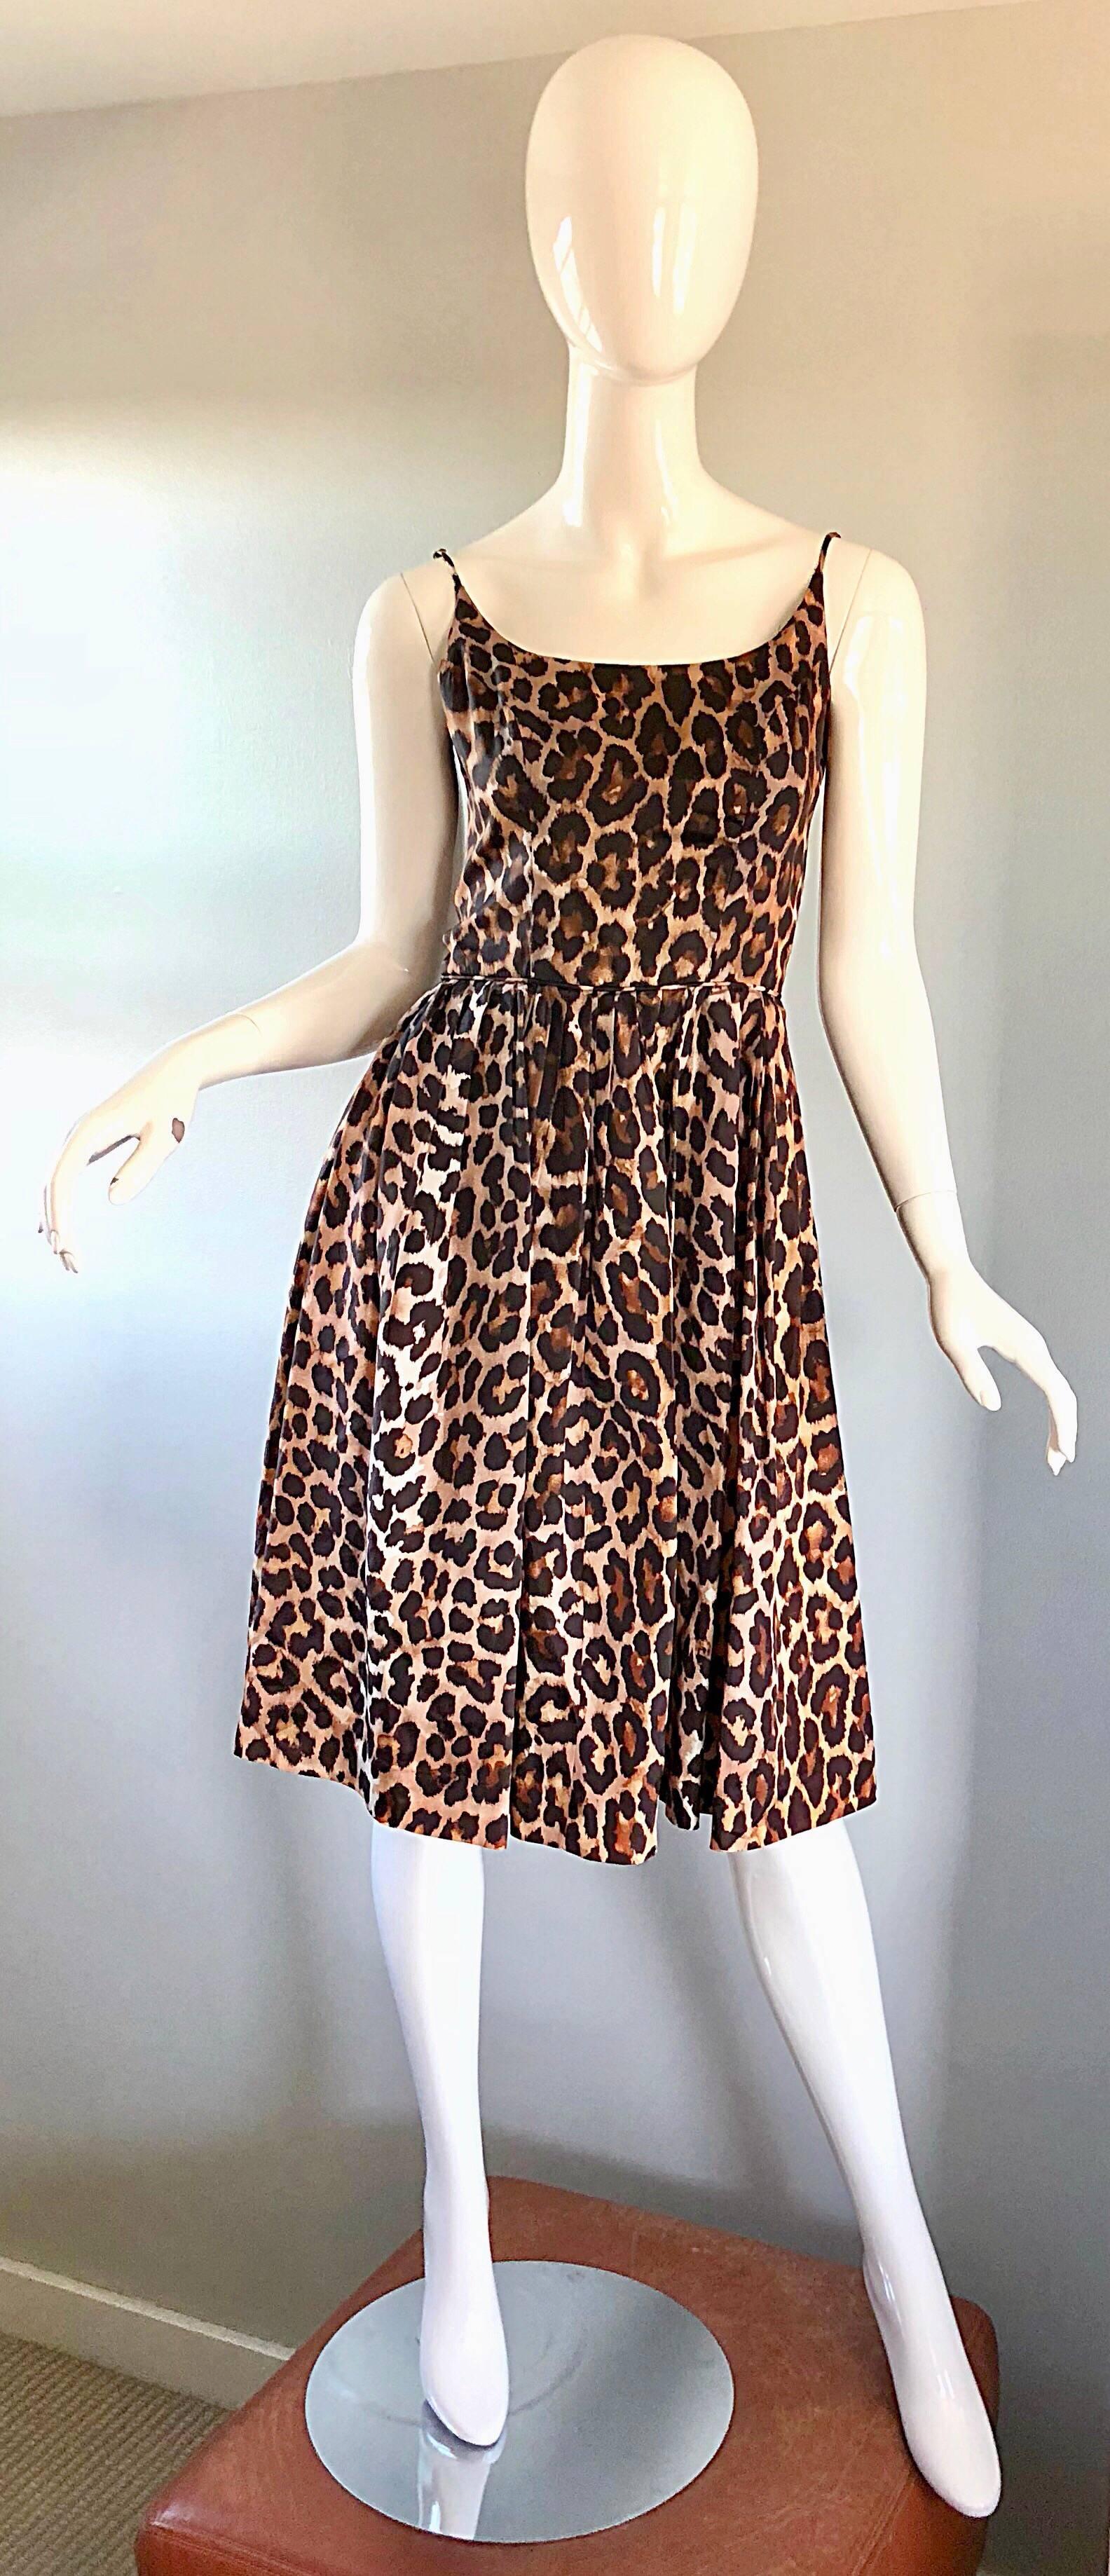 Gorgeous vintage 1950s demi couture leopard/cheetah print fit and flare silk dress! This is one bombshell of a dress, and is a classic beauty! Features allover animal print. Fitted bodice with a full forgiving skirt. Full metal zipper up the back